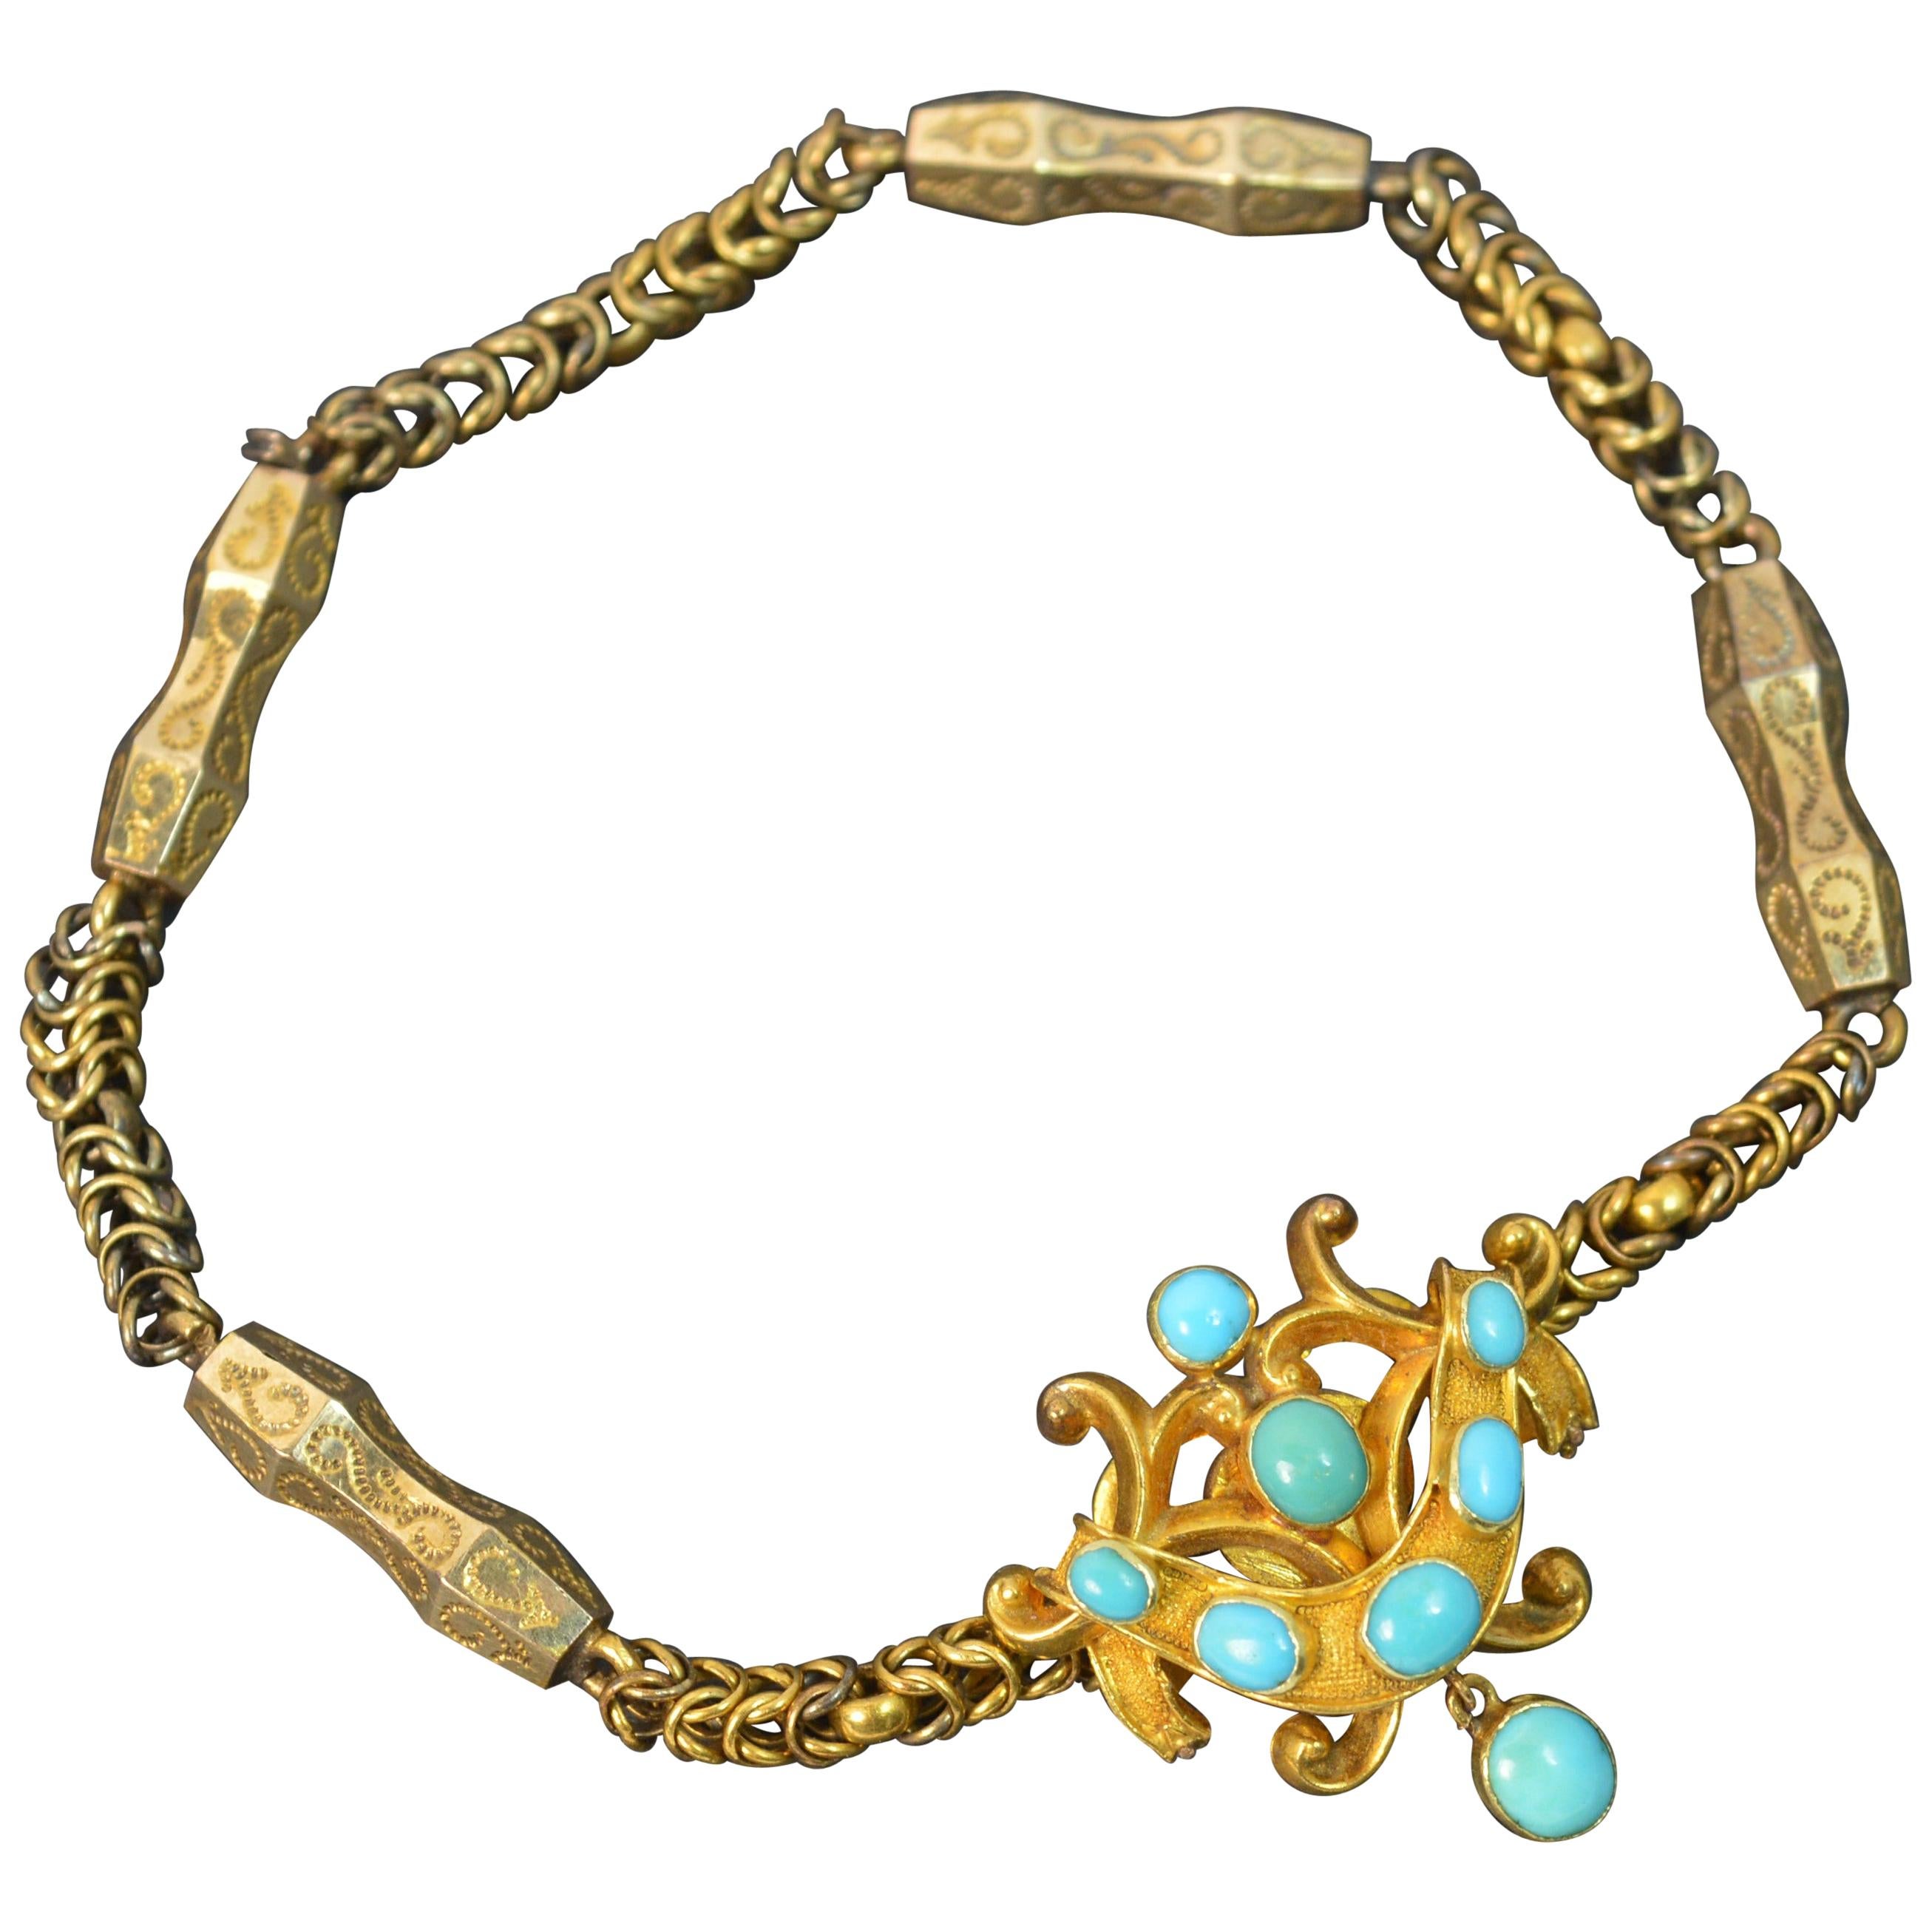 Mid-Victorian 15 Carat Gold and Turquoise Fancy Snake Bracelet